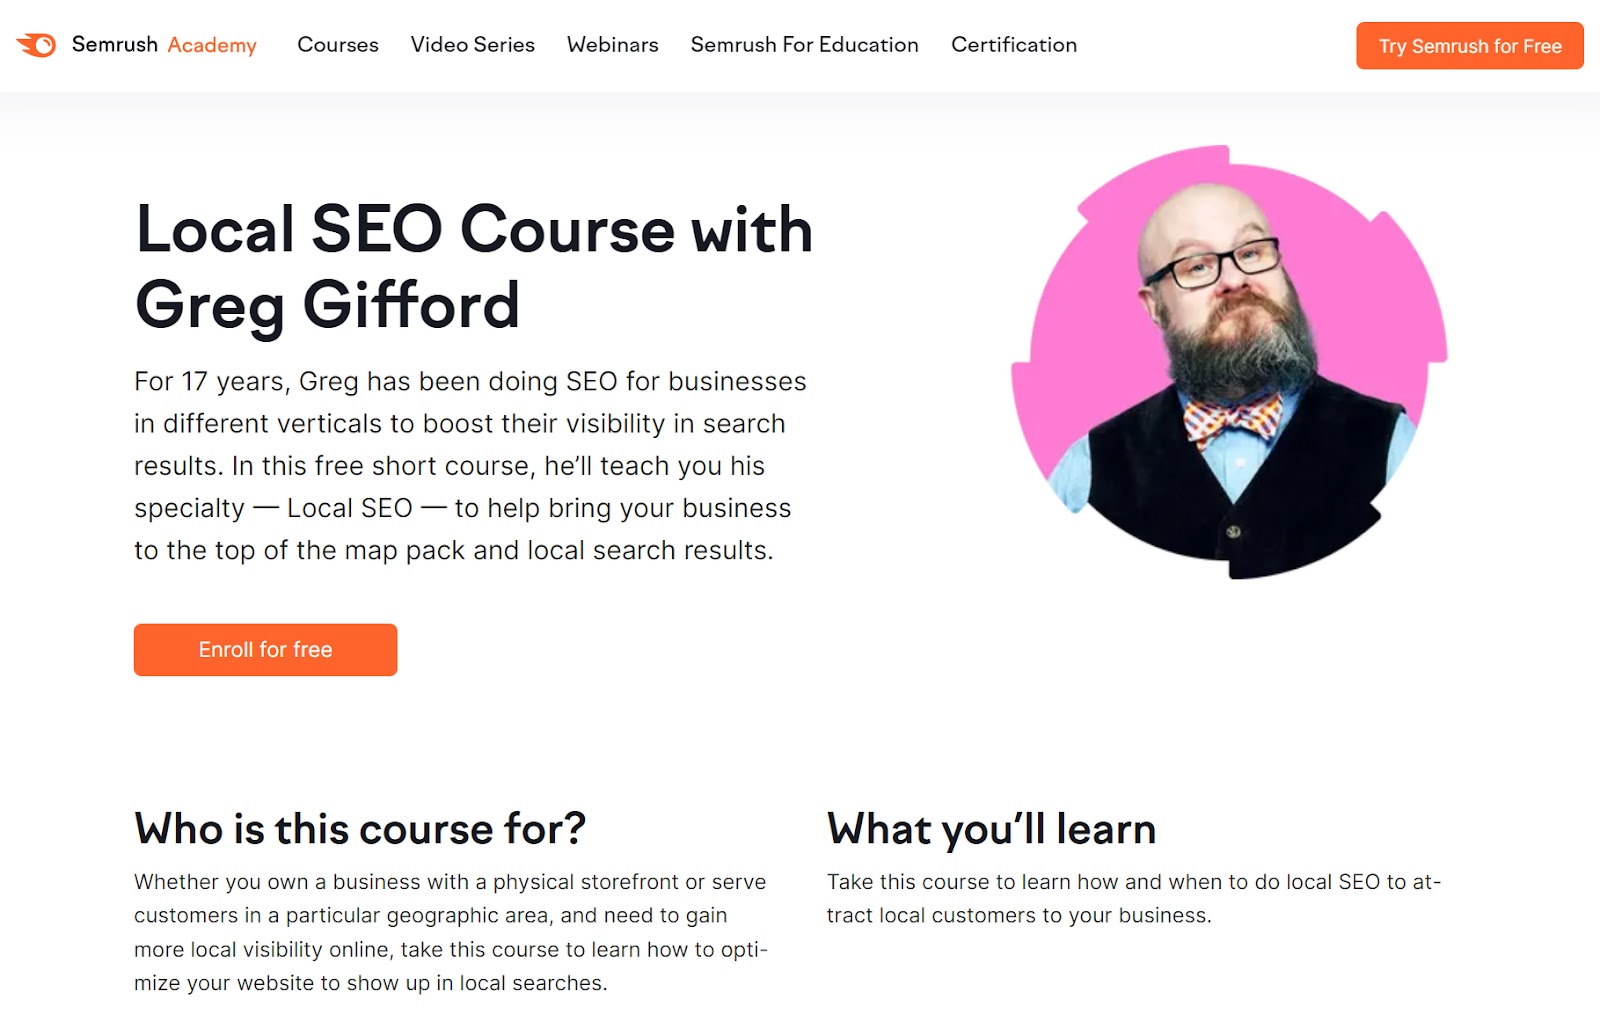 Local SEO Course with Greg Gifford landing page